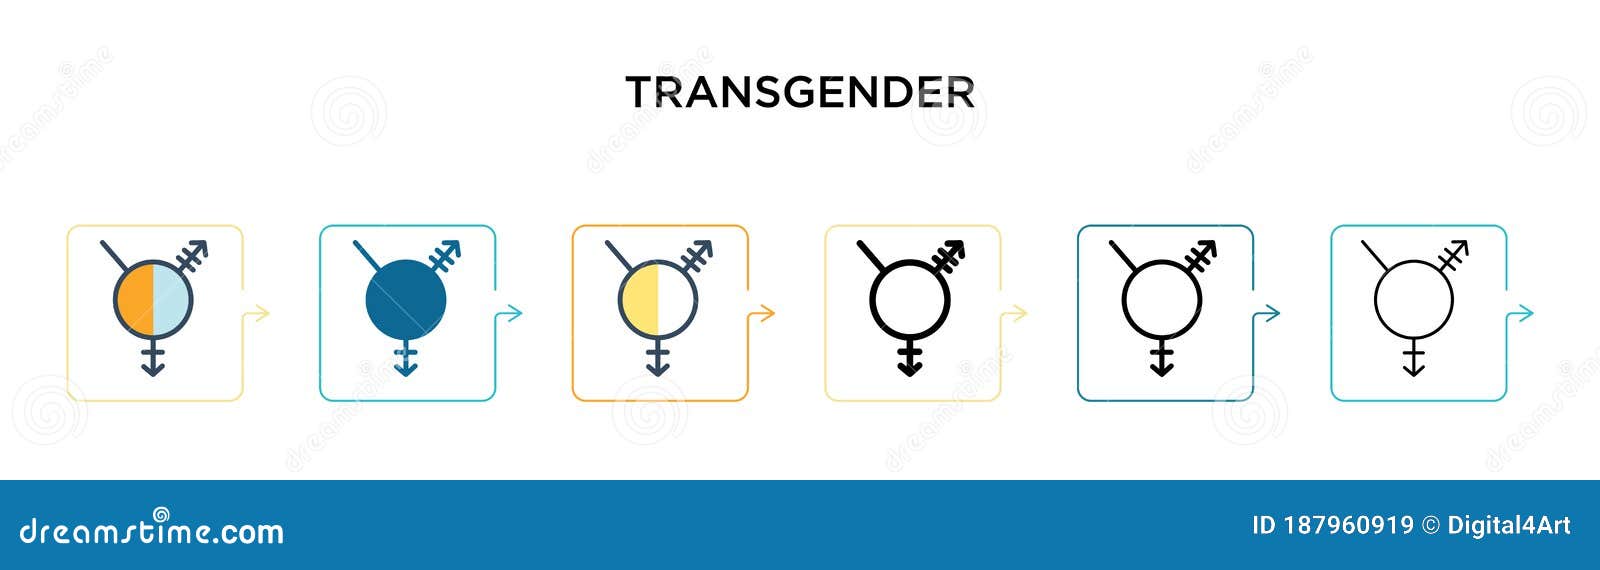 Transgender Symbol Vector Icon in 6 Different Modern Styles. Black, Two ...